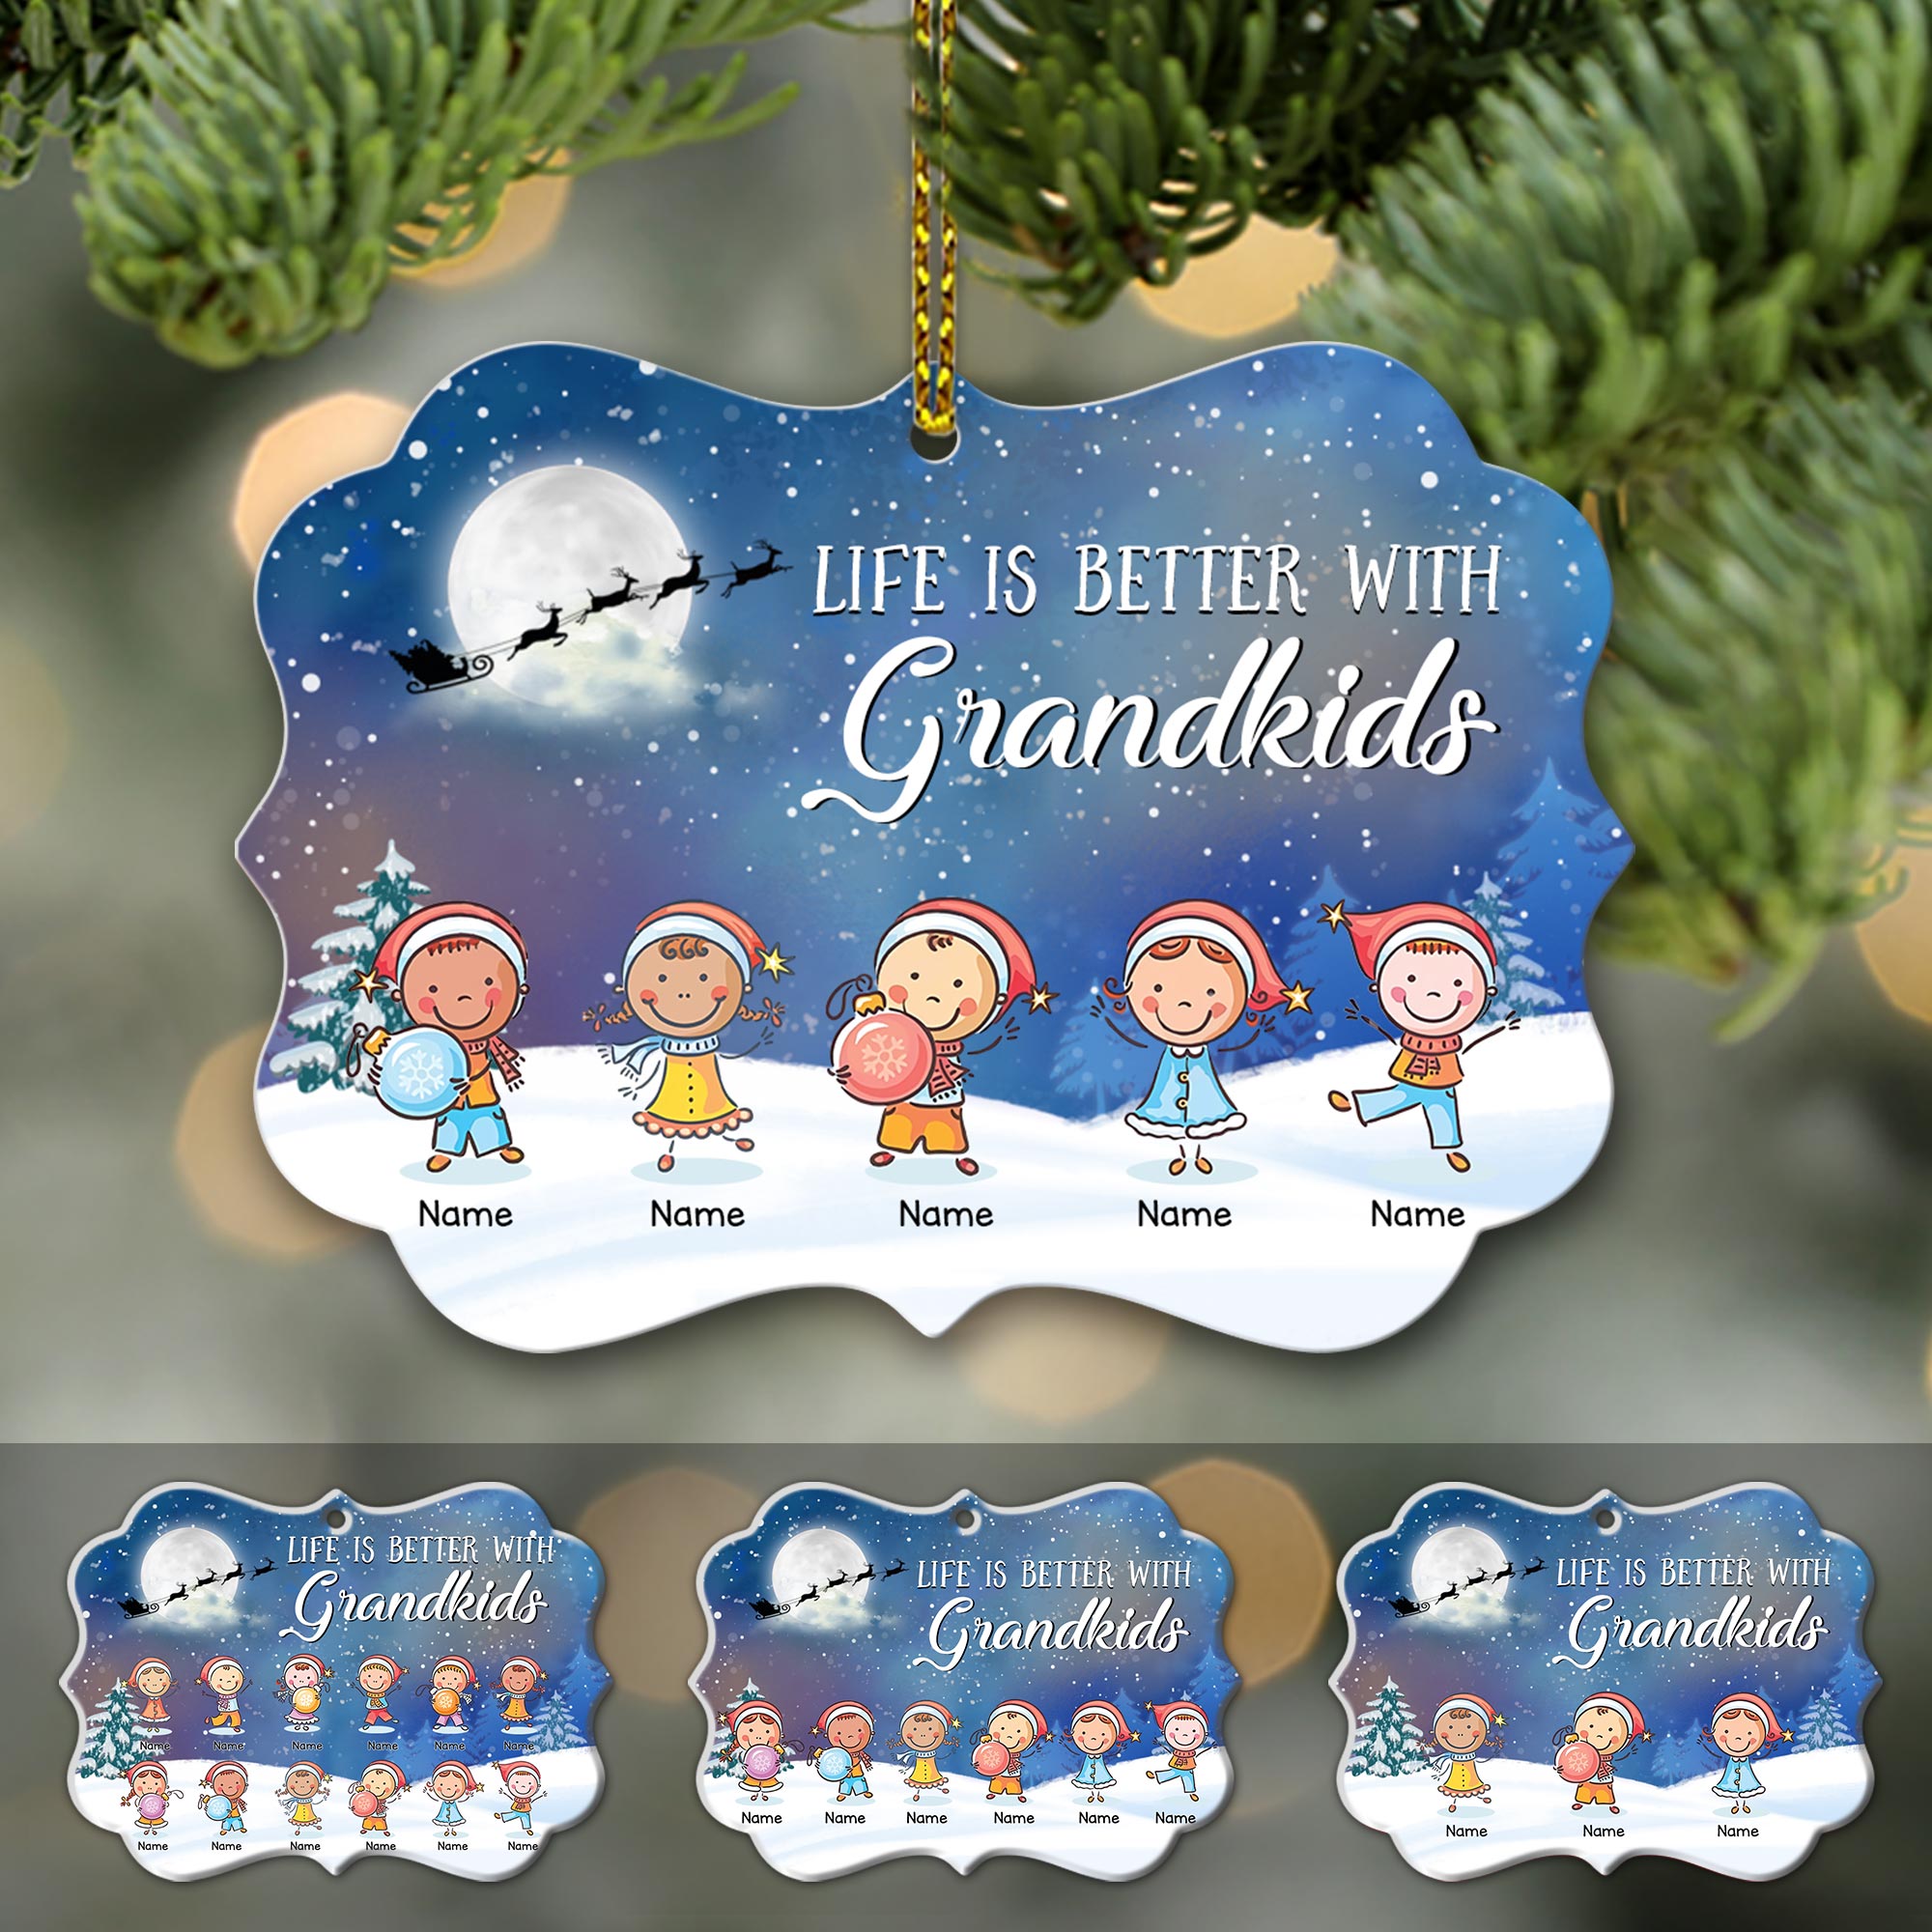 Personalized Life is Better With Grandkids Ornament, Grandma With Grandkids Name Ornament Tree.